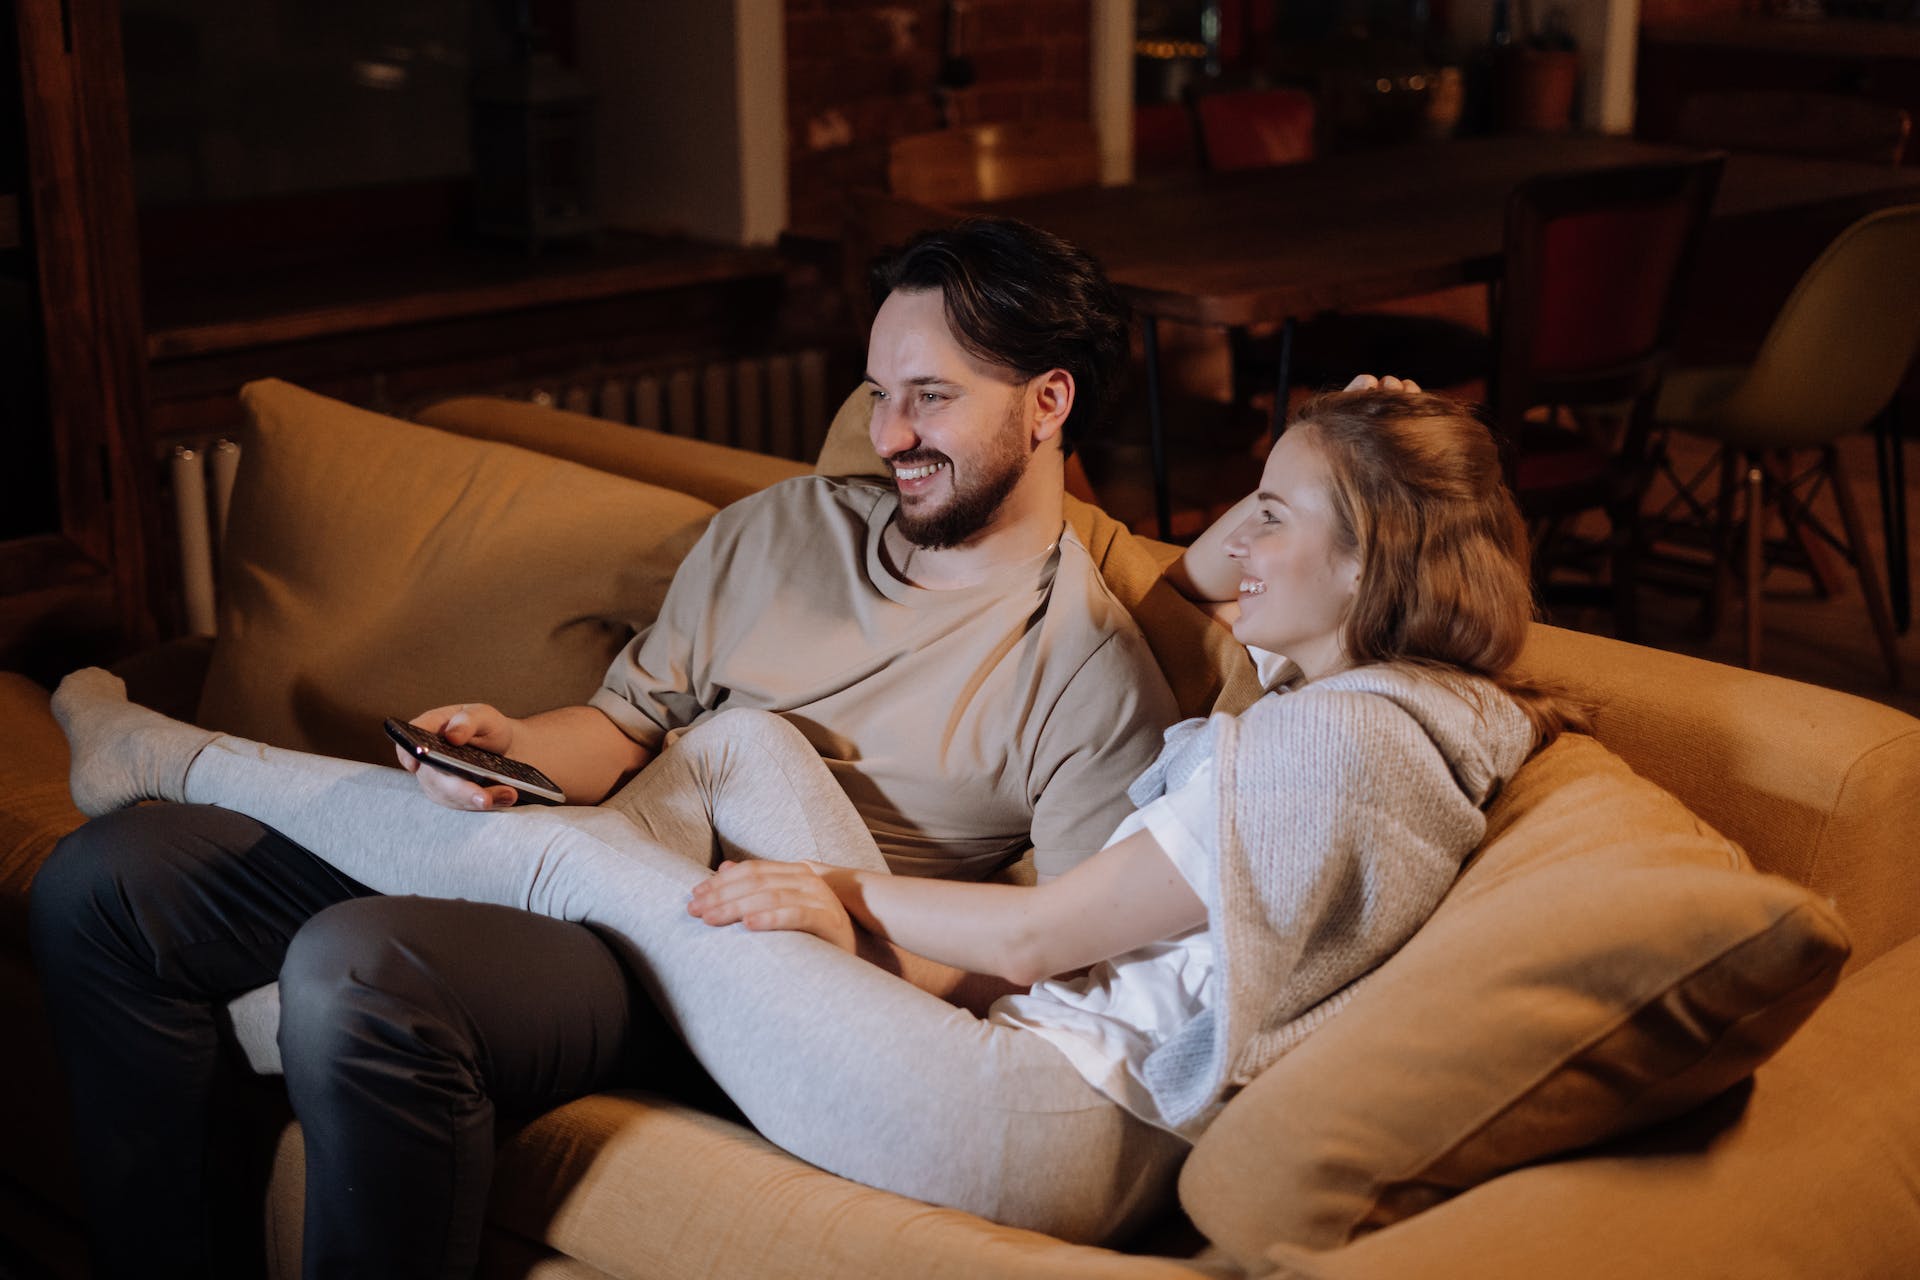 A couple cuddling while watching TV at home | Source: Pexels